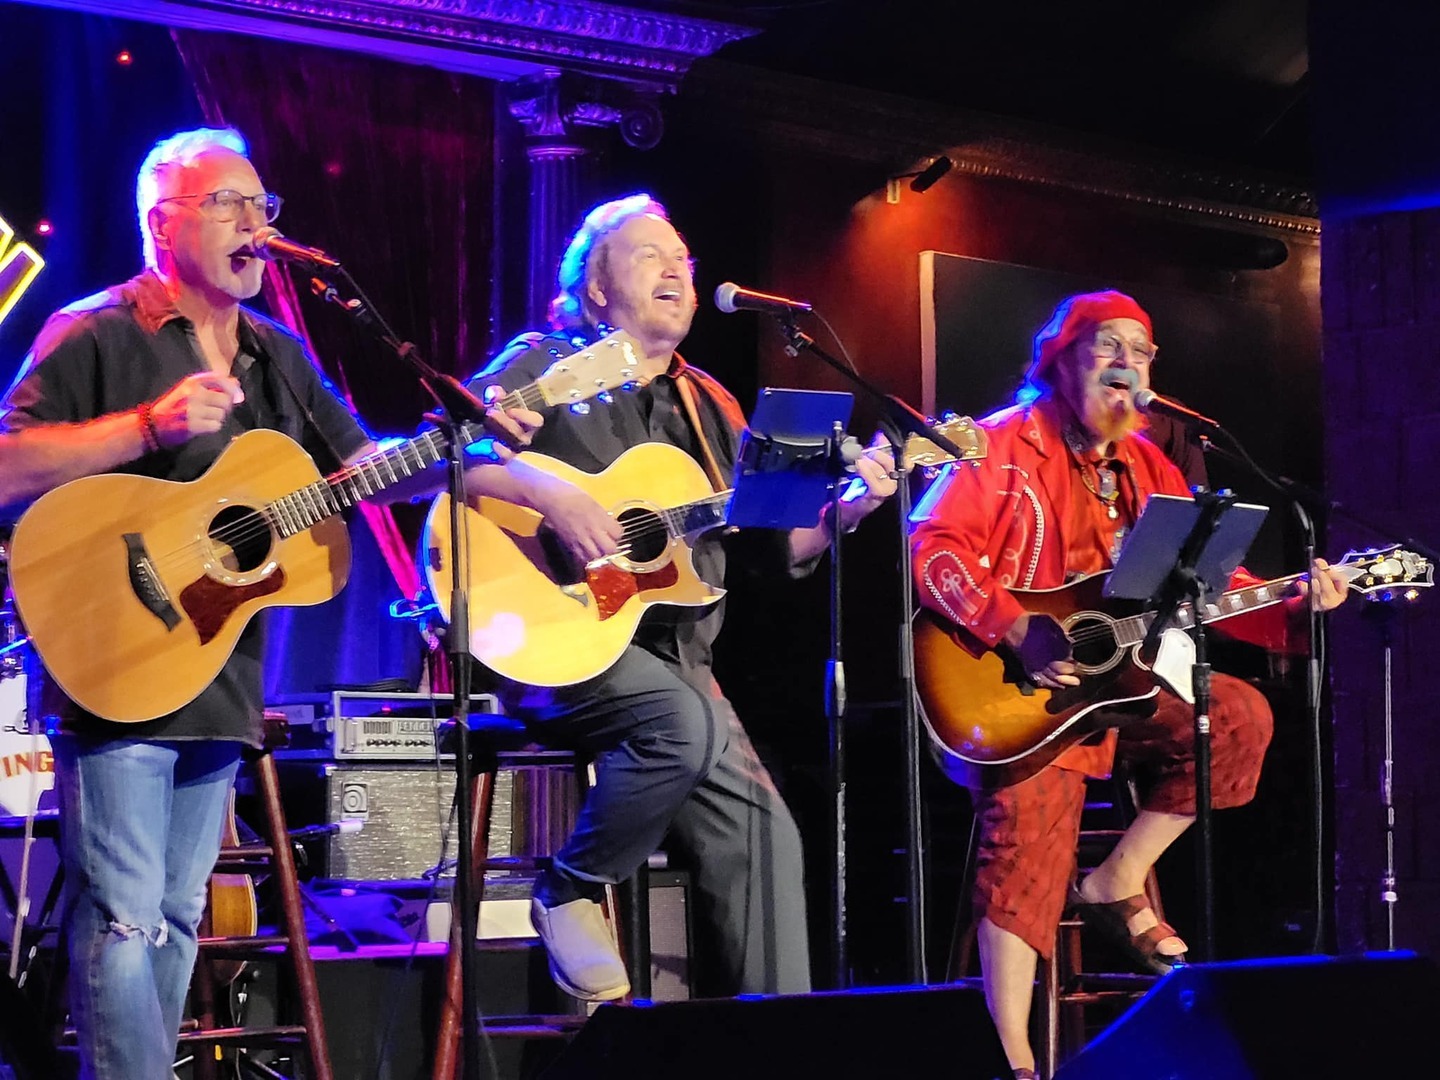 Laurel Canyon - A Tribute to Crosby, Stills, and Nash, Palm Beach Gardens, Florida, United States